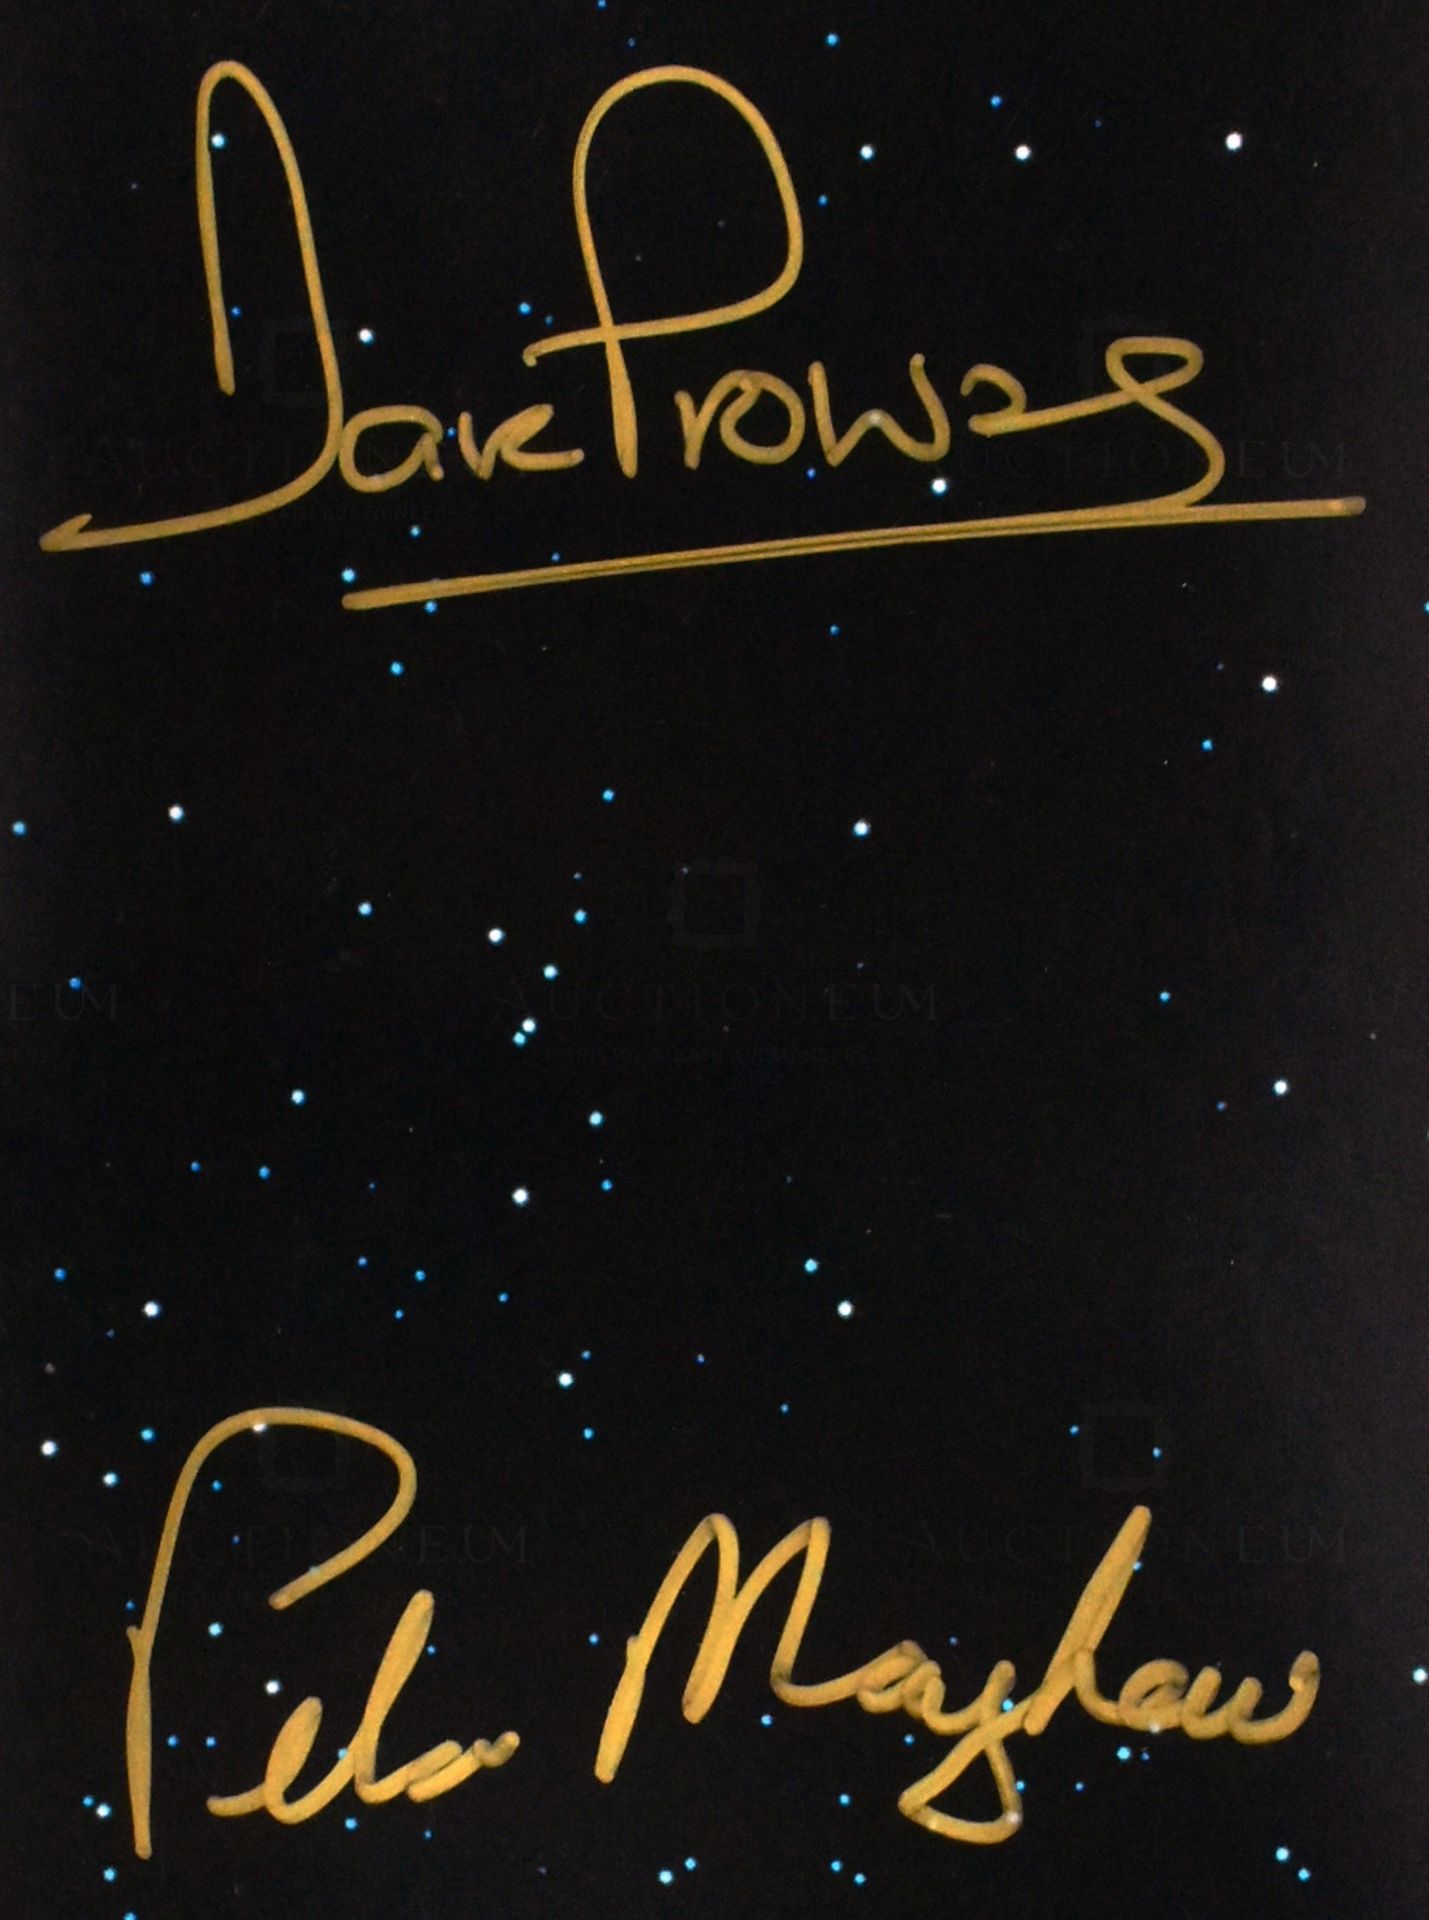 STAR WARS - SPECIAL EDITIONS - MAIN CAST SIGNED POSTER - PSA / DNA - Image 3 of 8